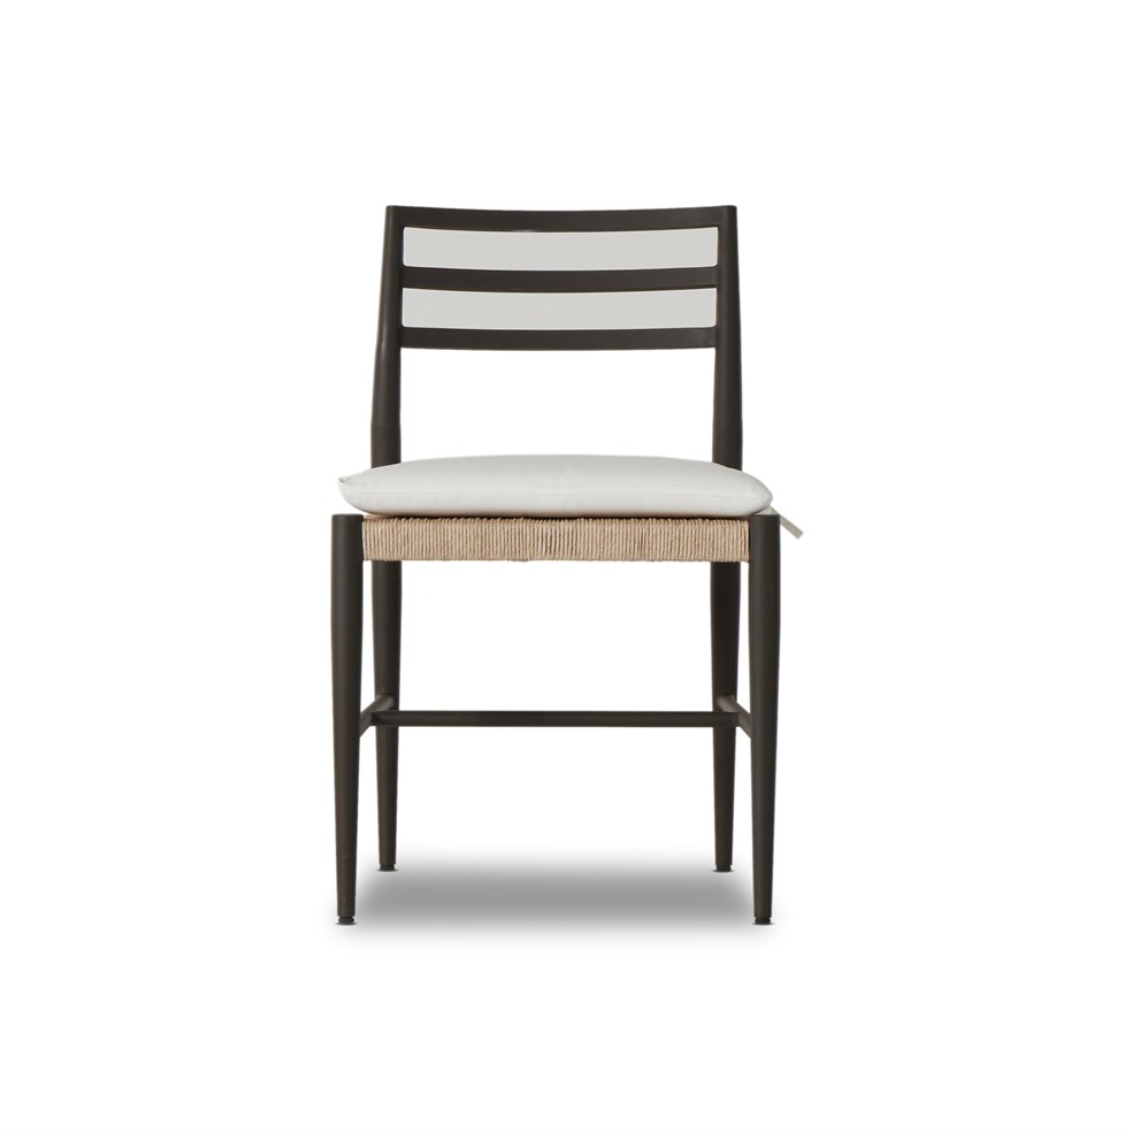 Glenmore Outdoor Dining Chair